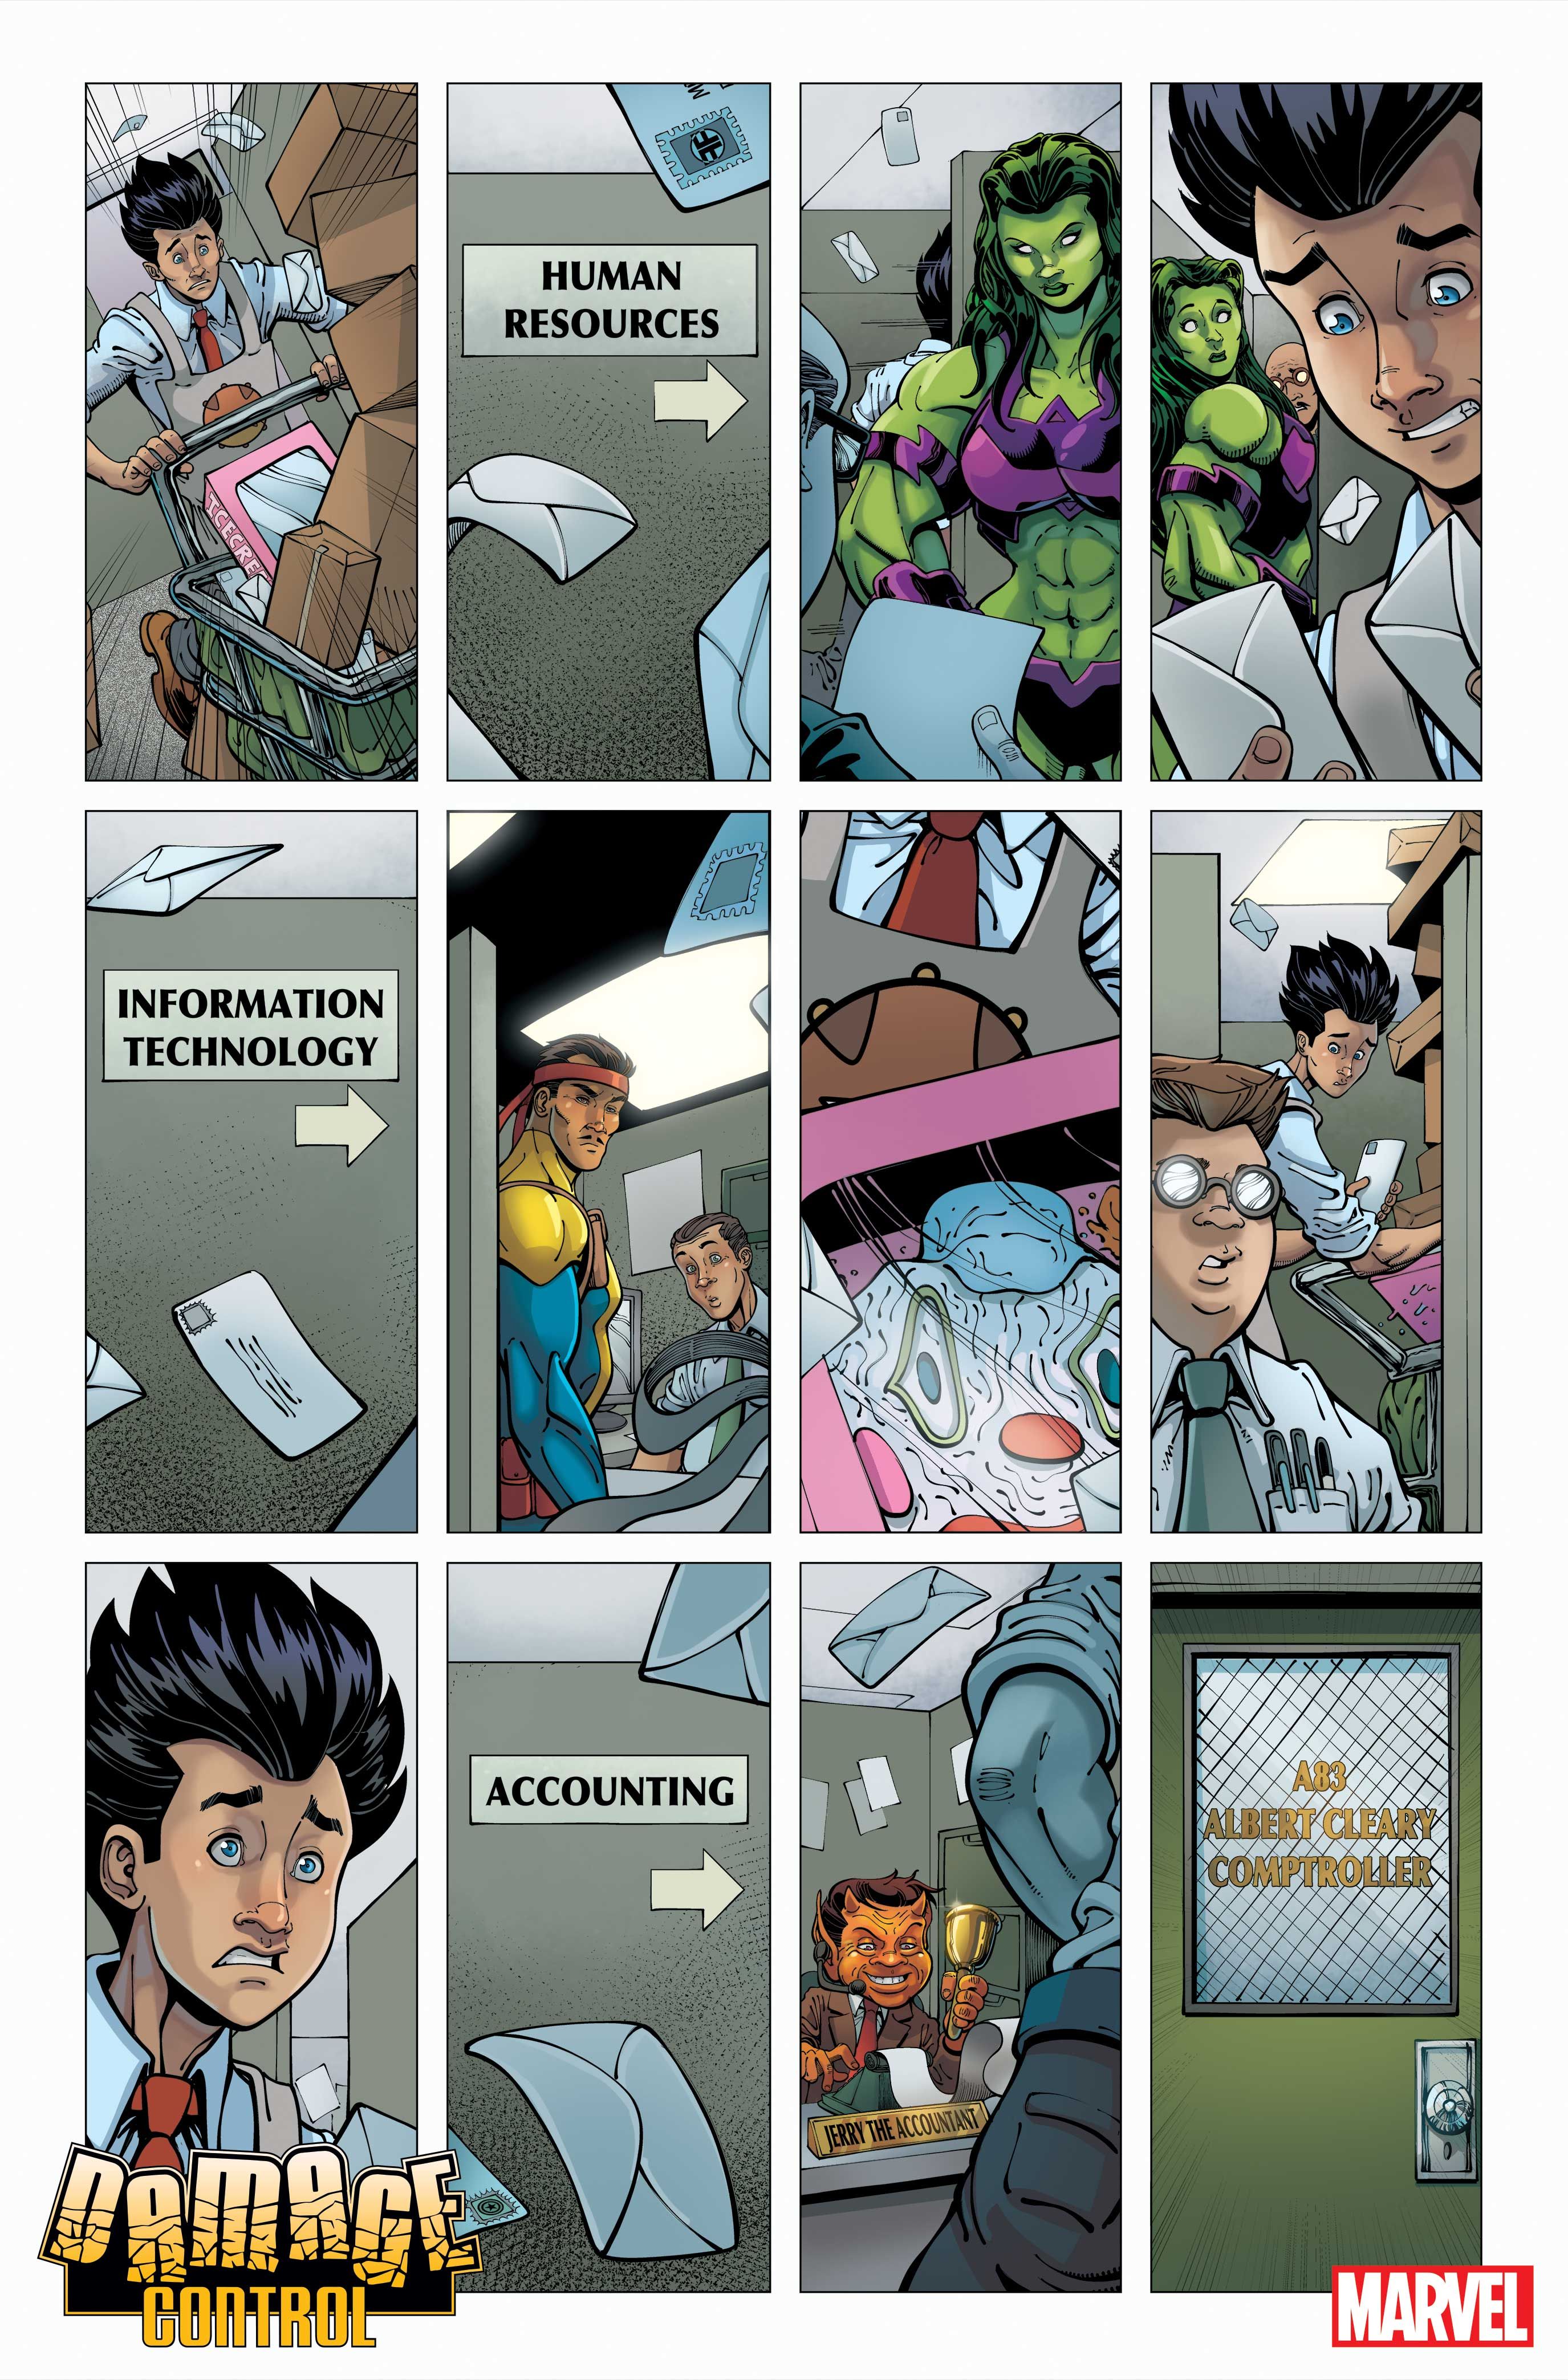 Damage Control #1 preview page 3